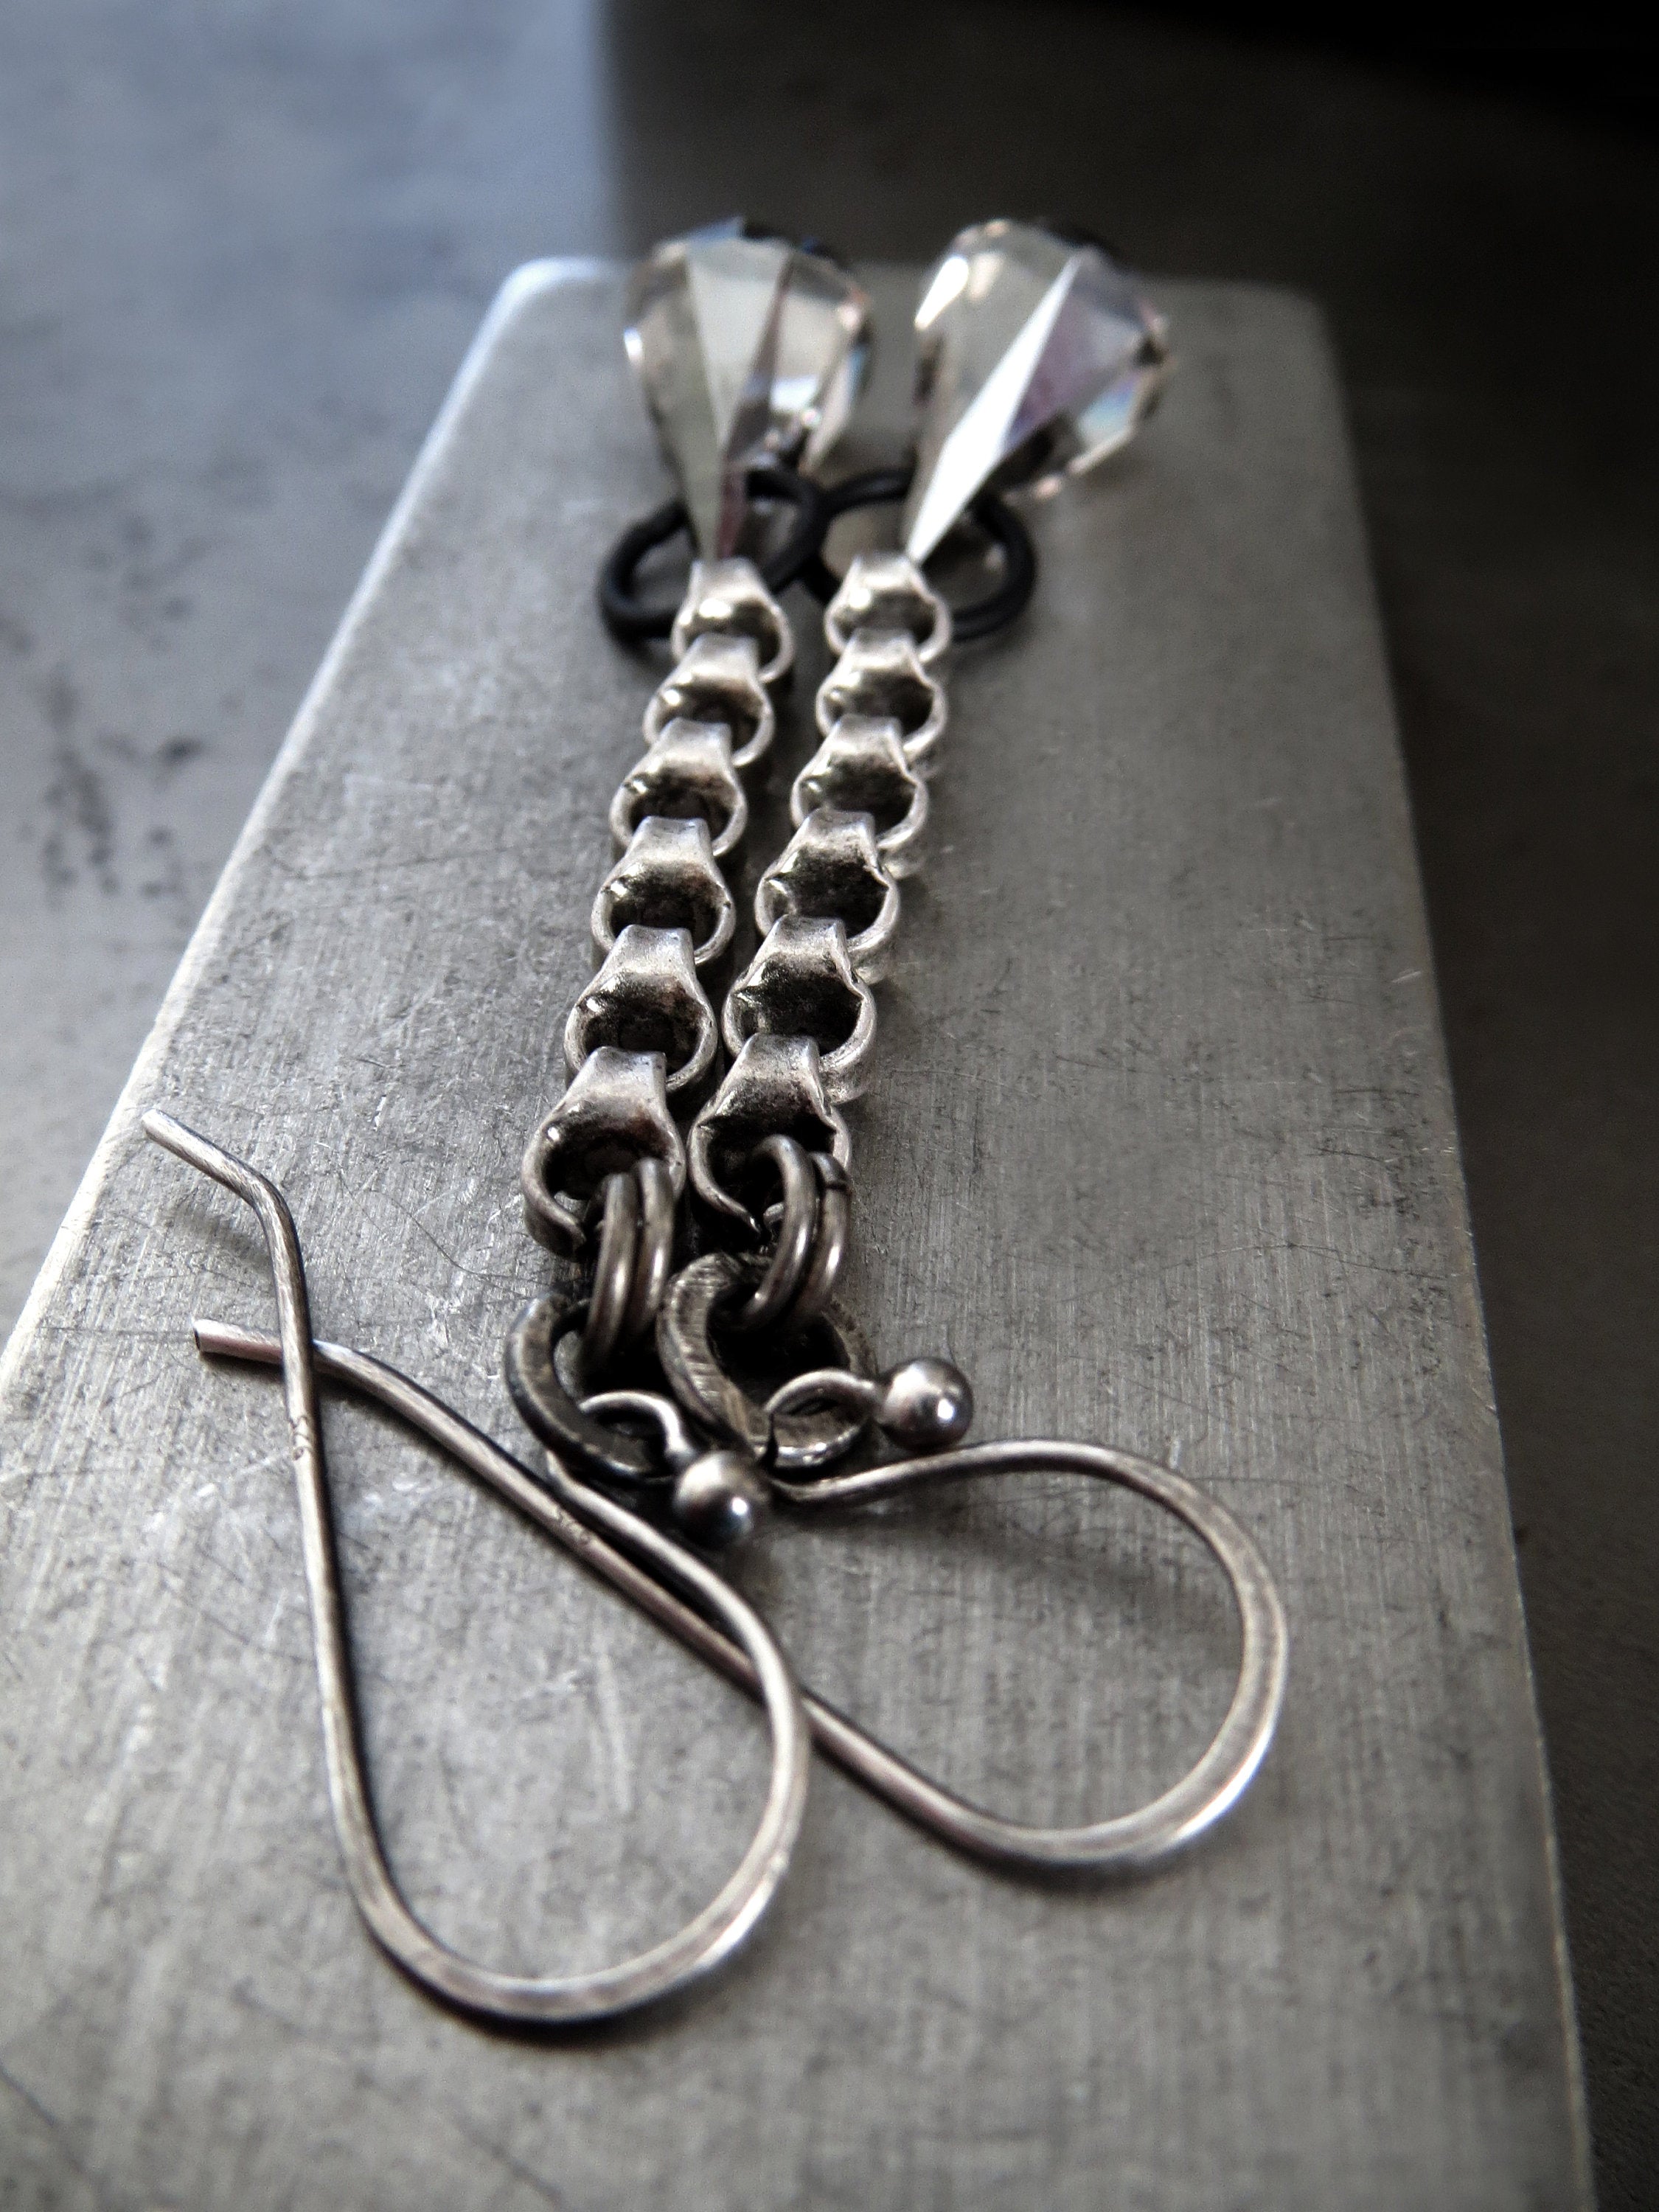 EXACT - Long Chain Earrings with Sheer Grey Swarovski Crystals - Architectural Geometric Modern Jewelry